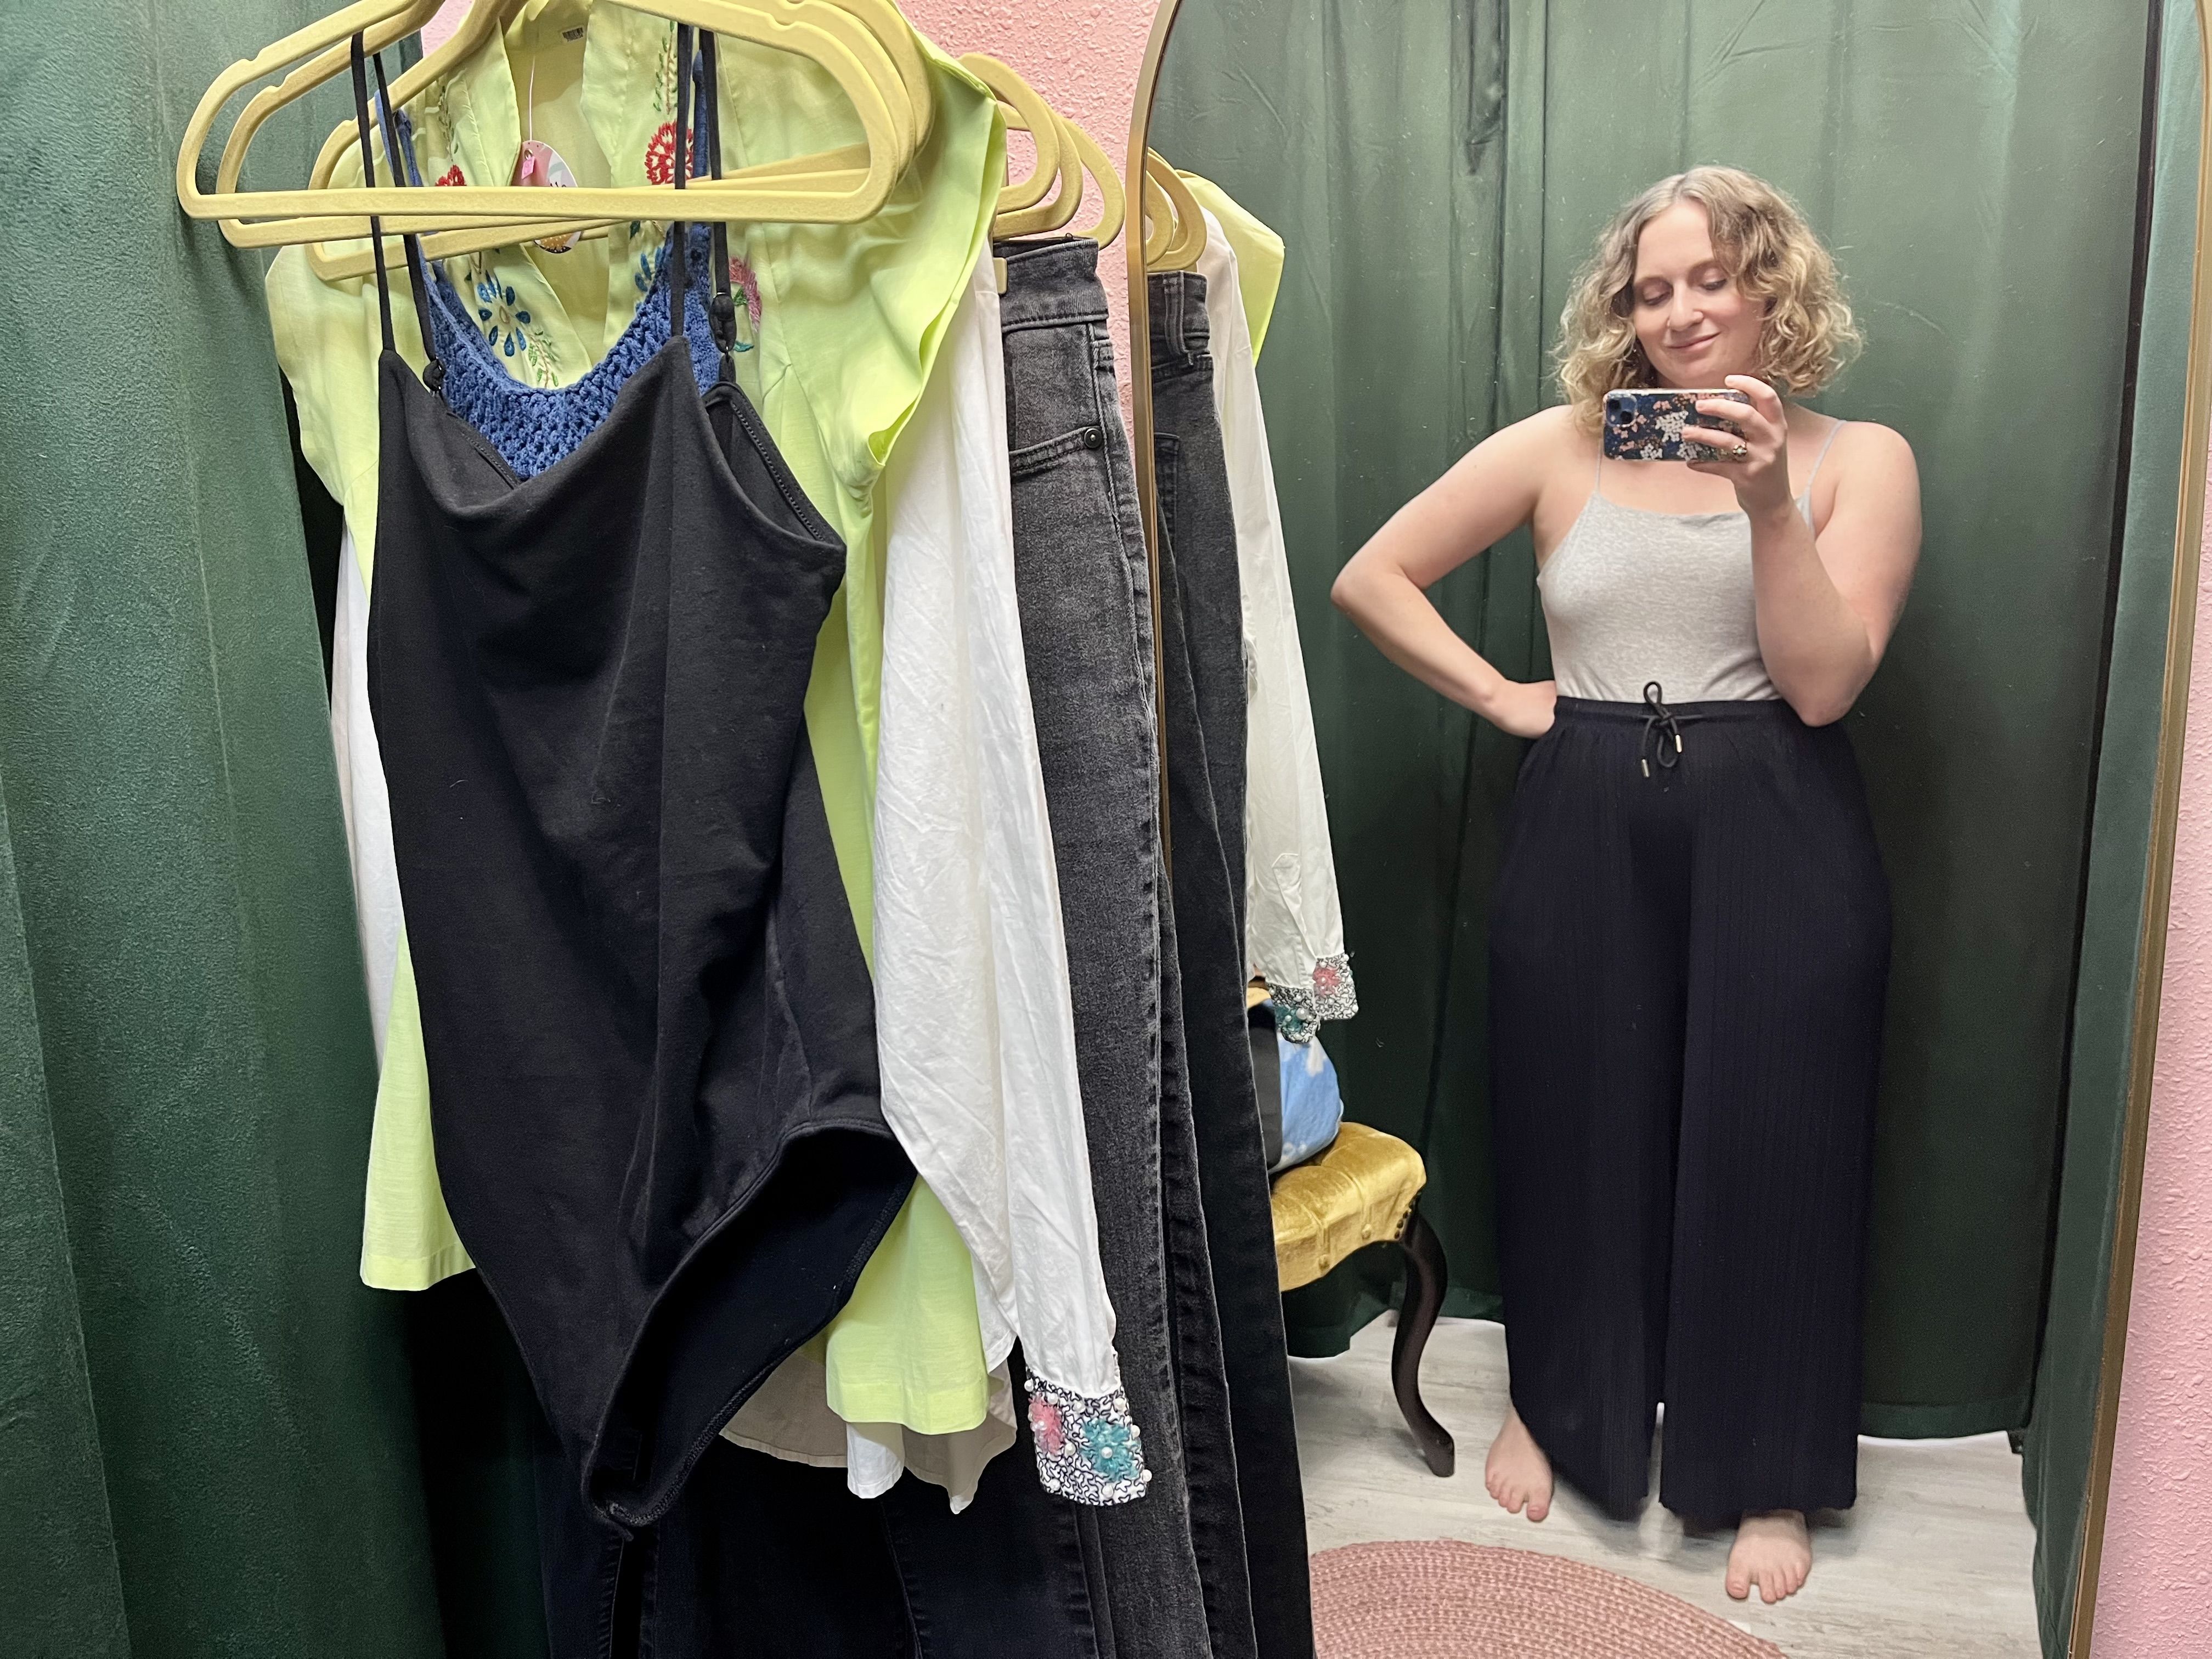 A woman in wide-leg navy pants and a gray top taking a mirror selfie in a dressing room next to a rack of clothes.